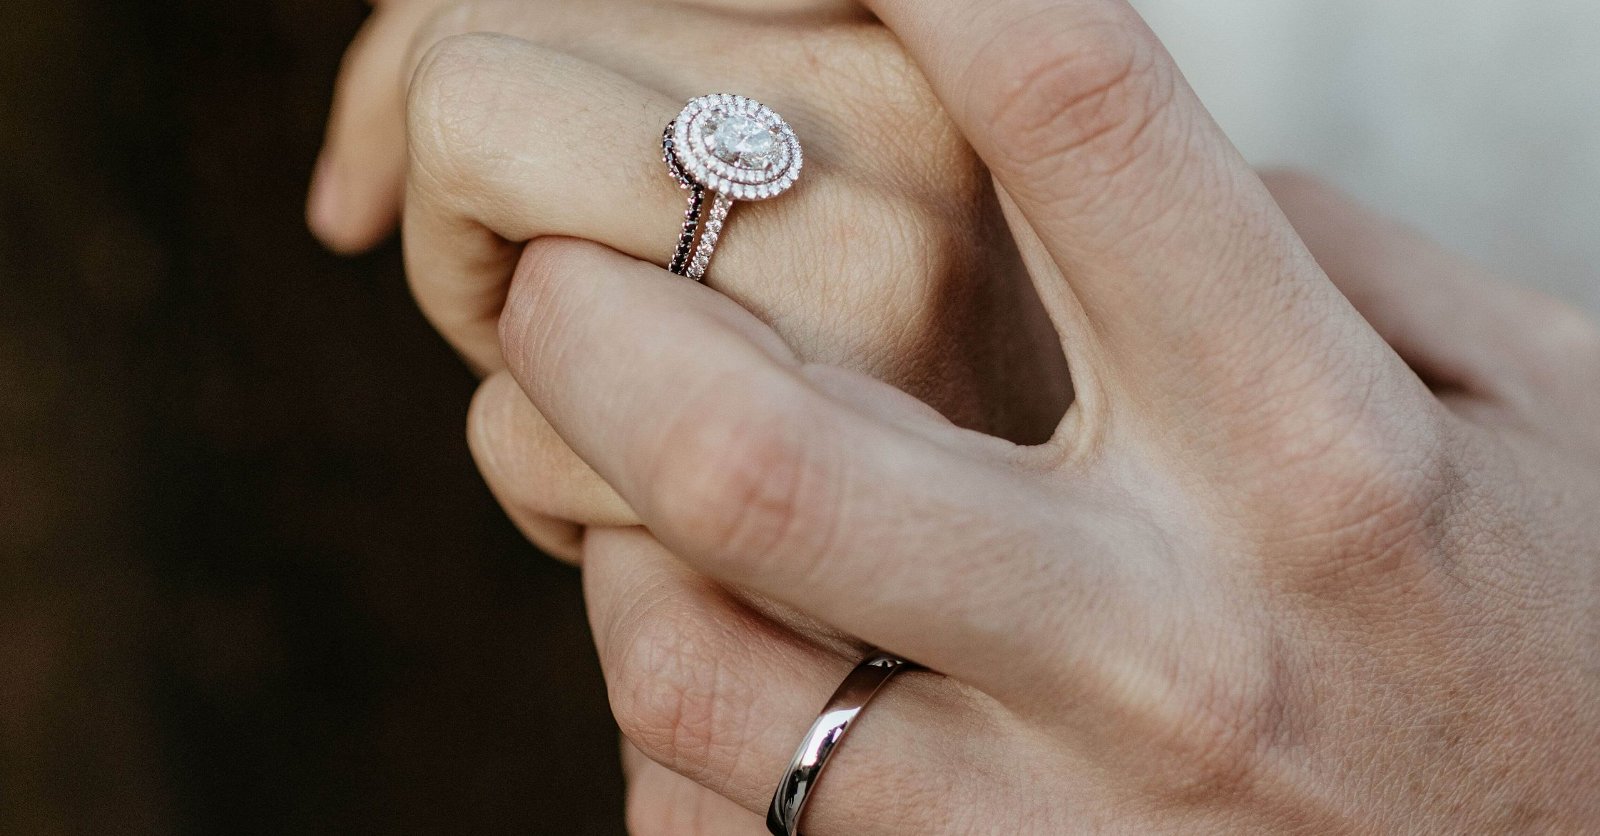 Do You Sleep With Your Engagement Ring On?